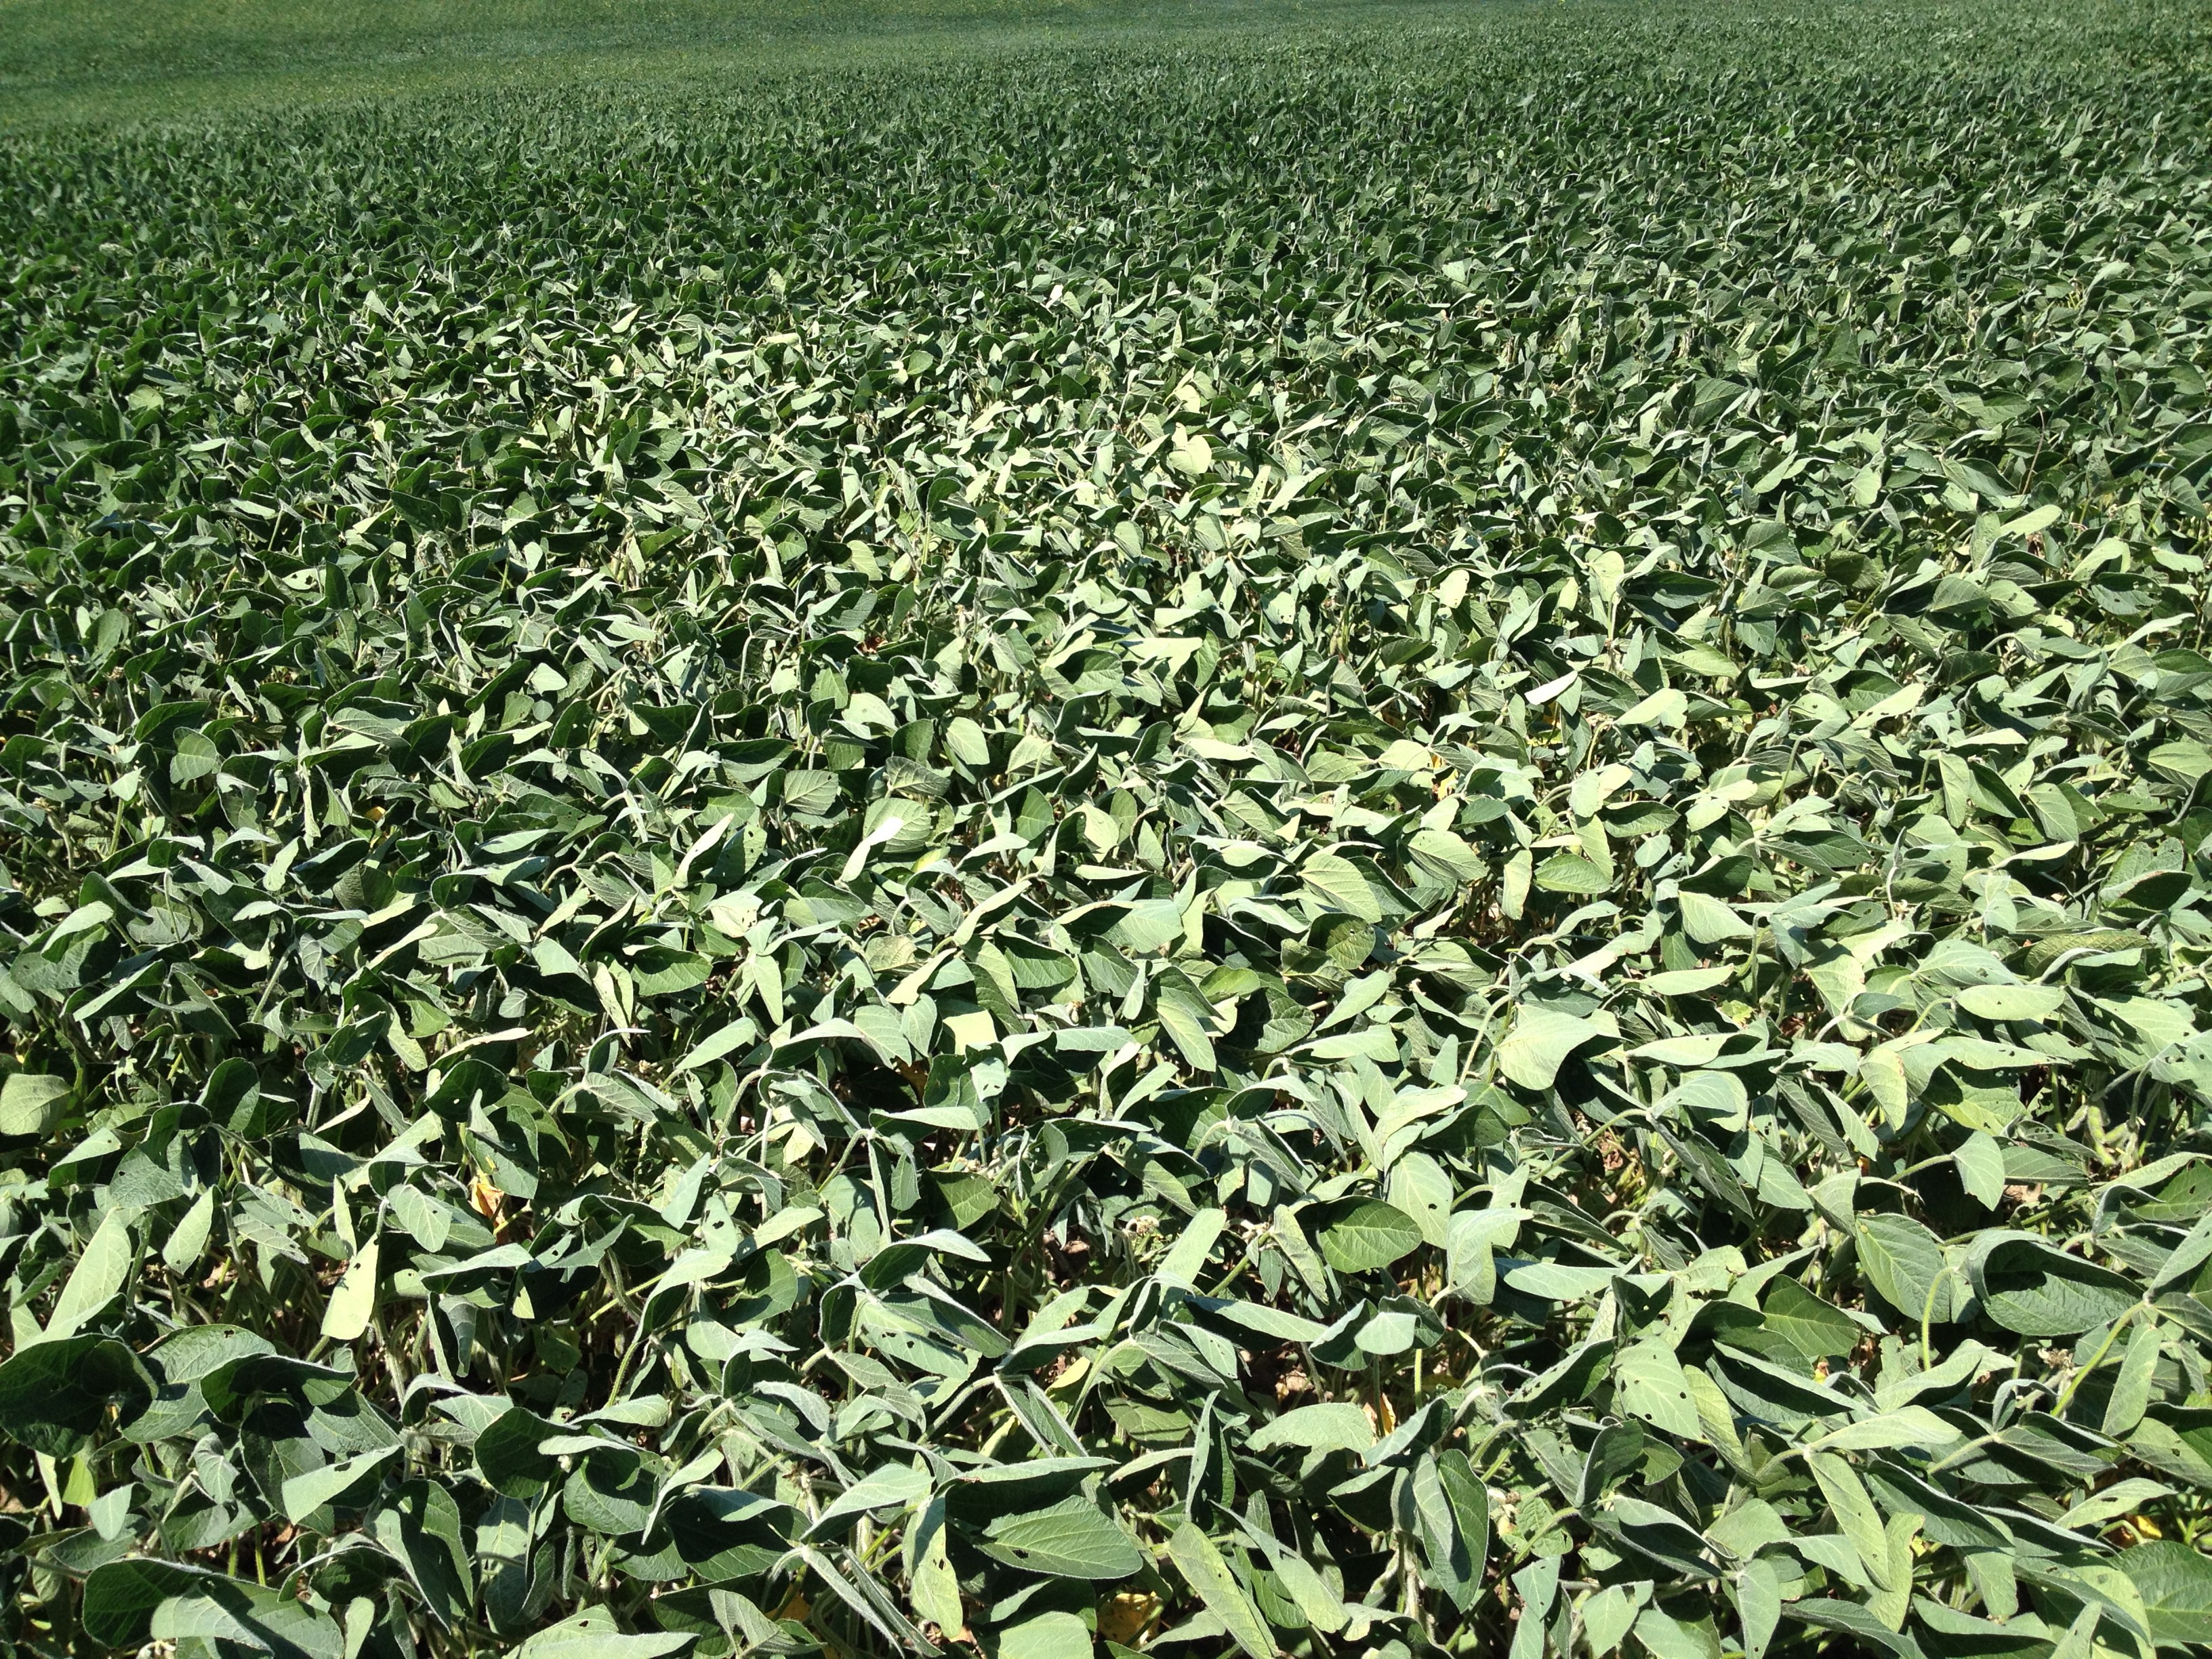 A field of soybeans with leaves flipping upward.